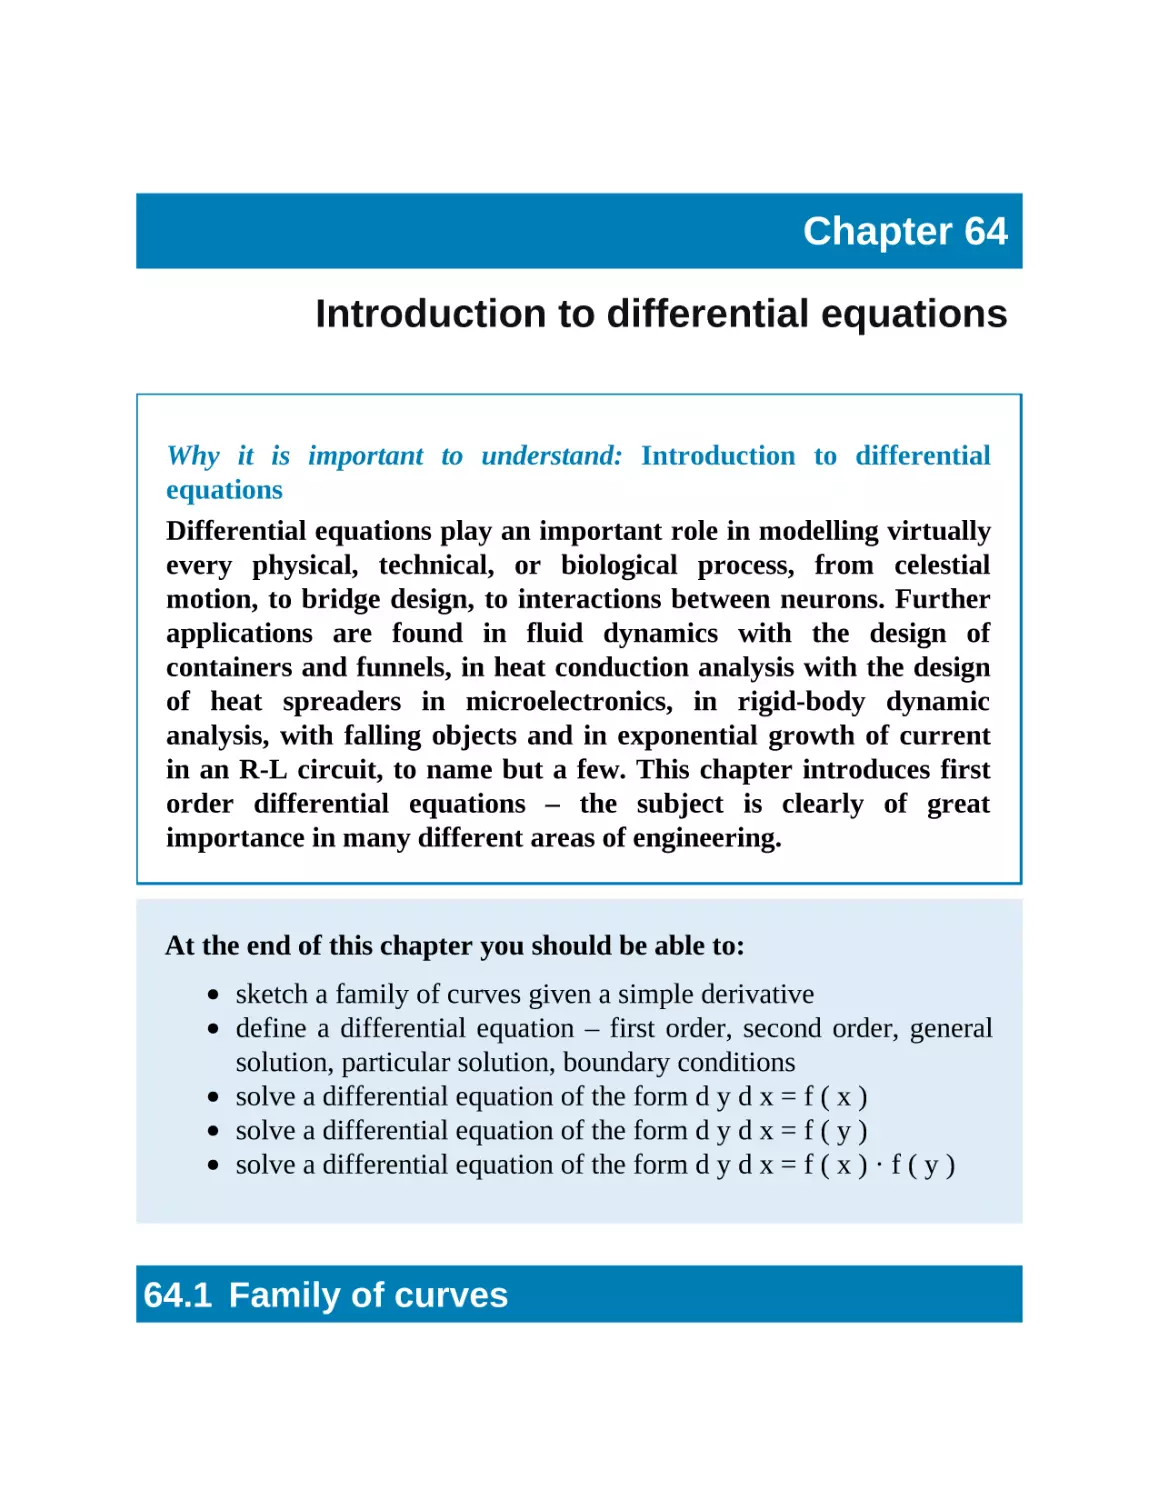 64 Introduction to differential equations
64.1 Family of curves